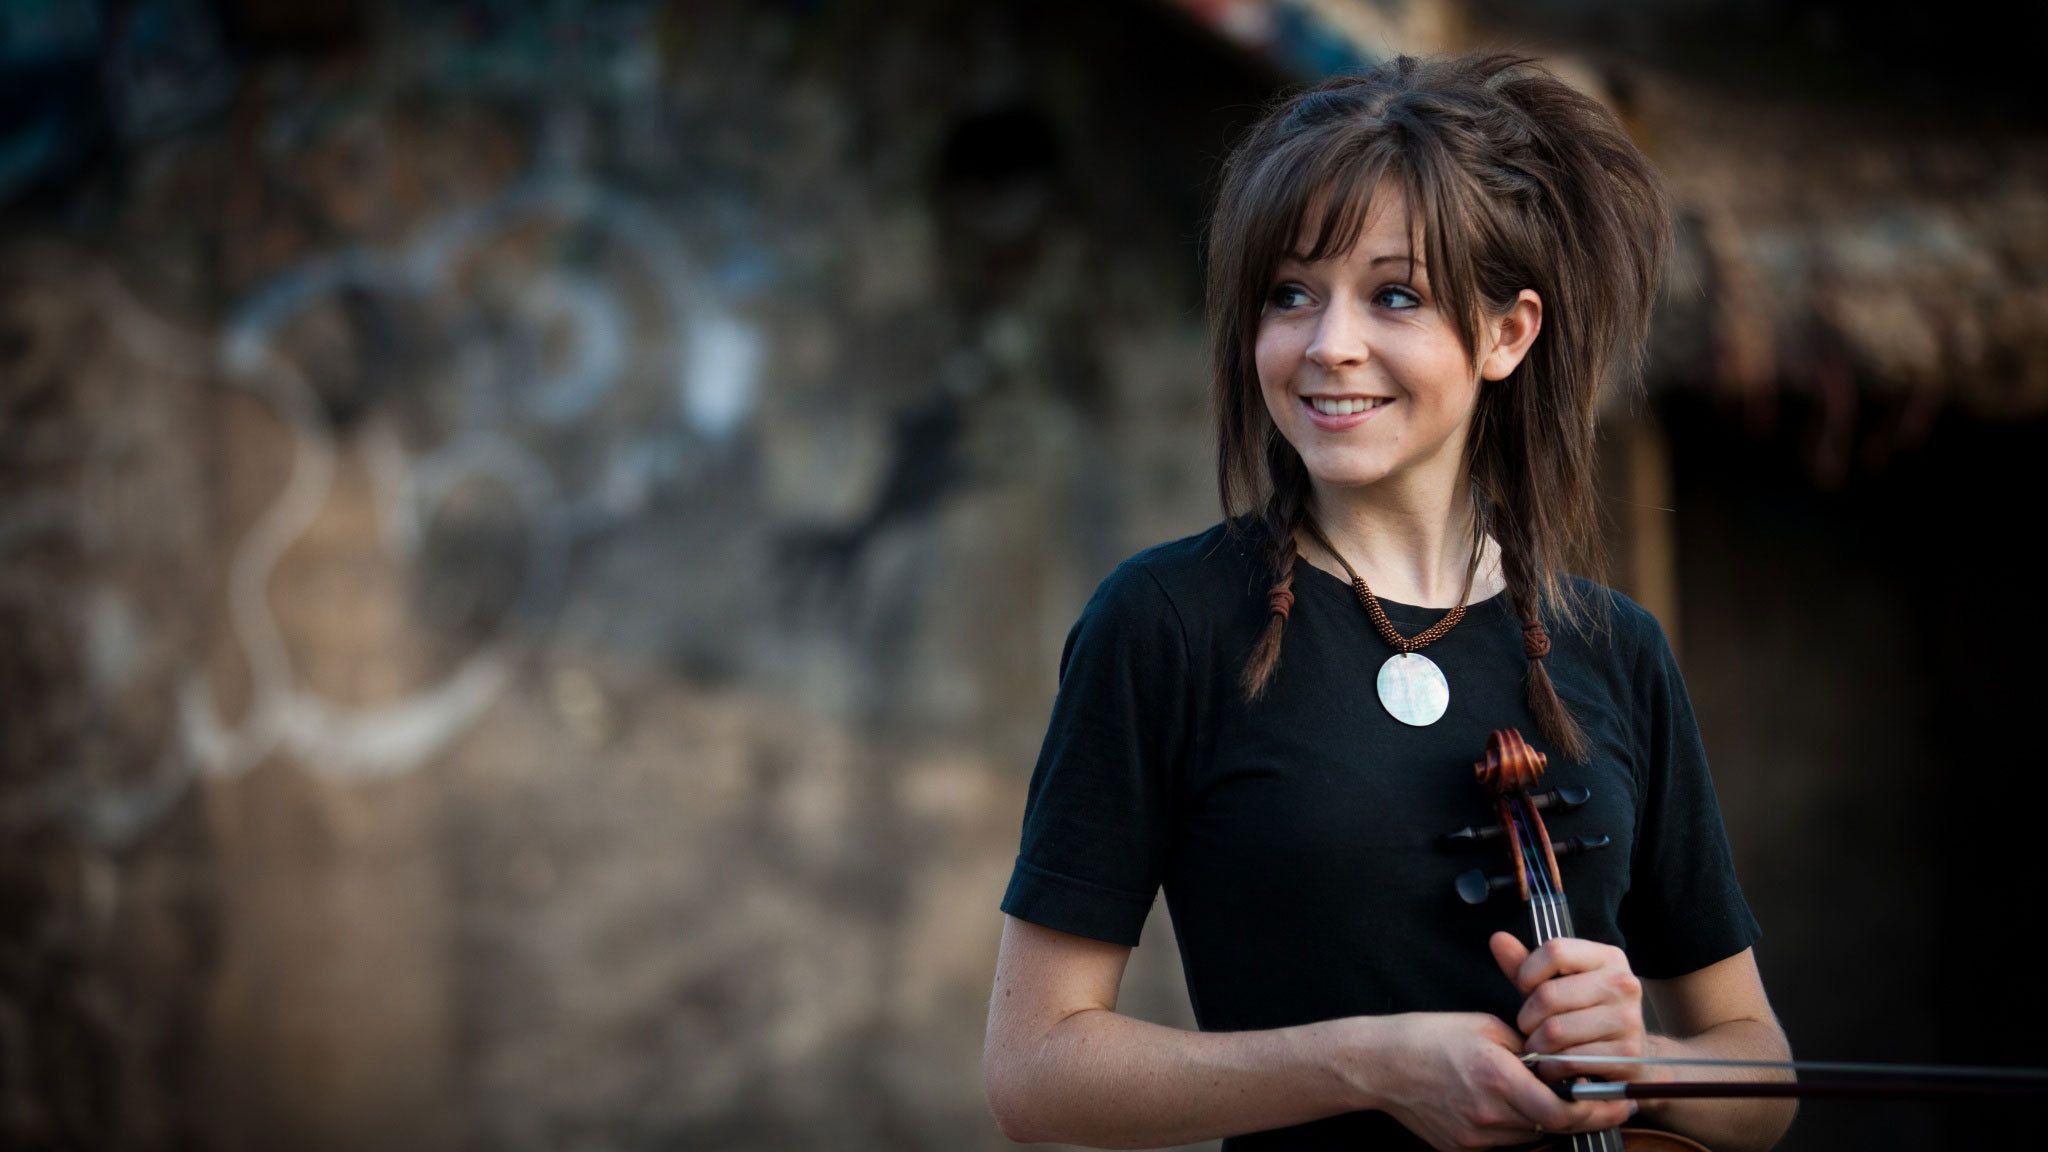 Lindsey Stirling Wallpaper Image Photo Picture Background